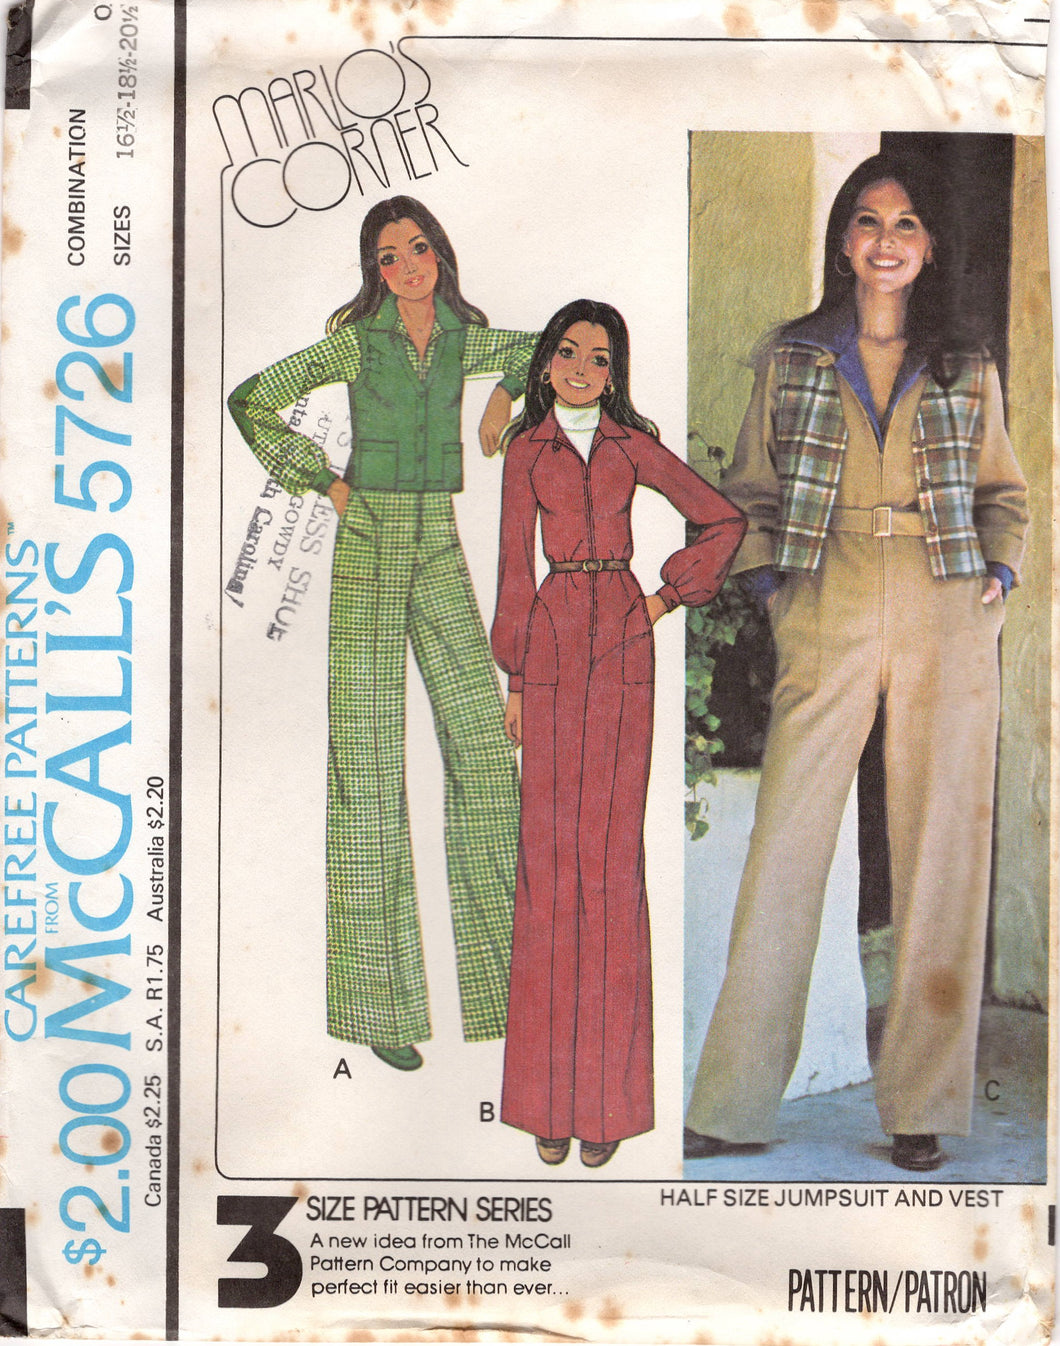 1970's McCall's Zip Front Jumpsuit with Hip Accents and Vest Pattern - Bust 37-45